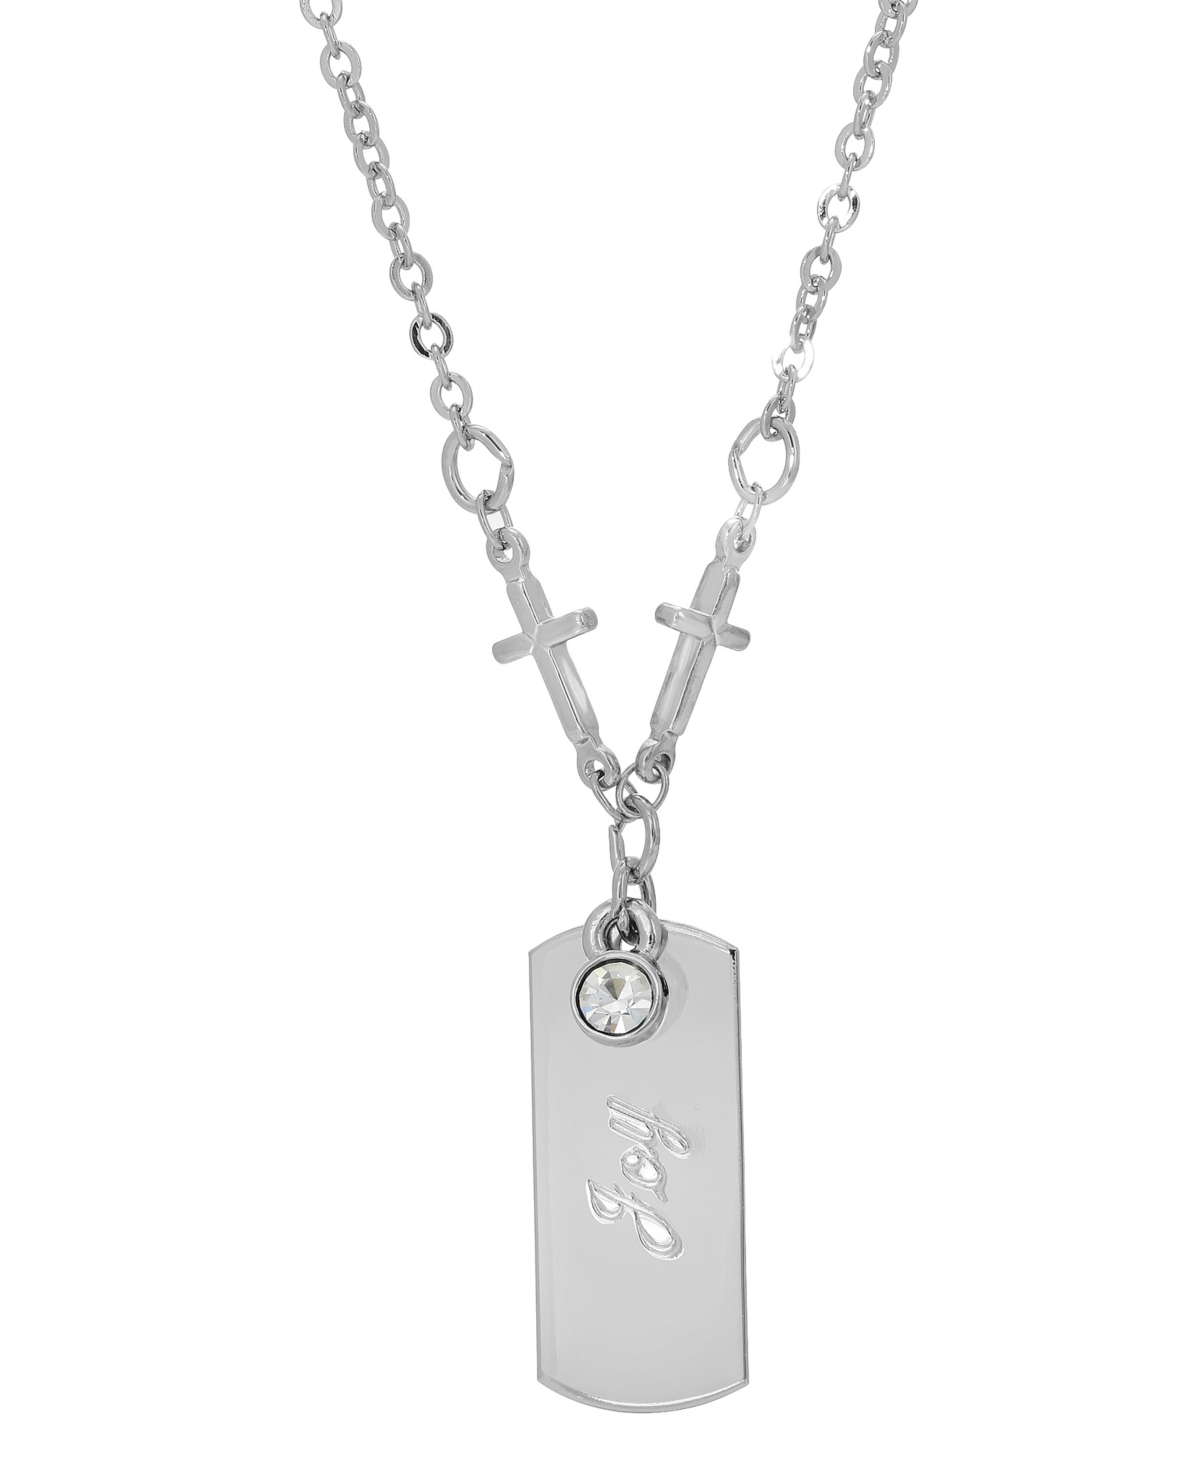 Silver-Tone Crystal Cross Chain Joy Necklace - White